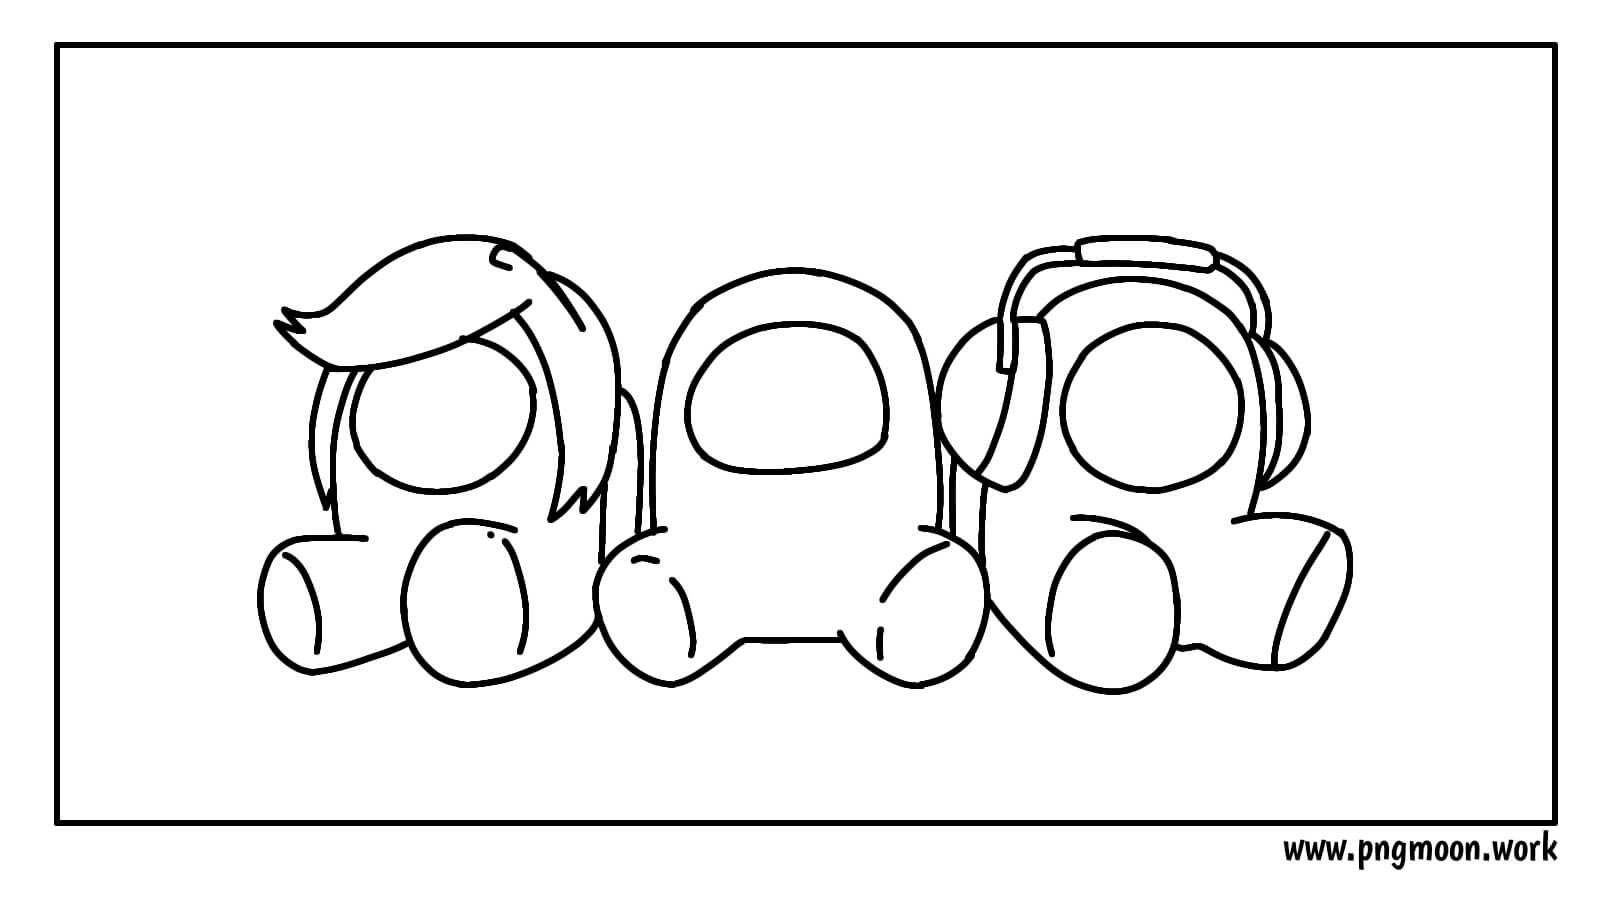 among us coloring pages pngmoon pngmoon png images coloring pages